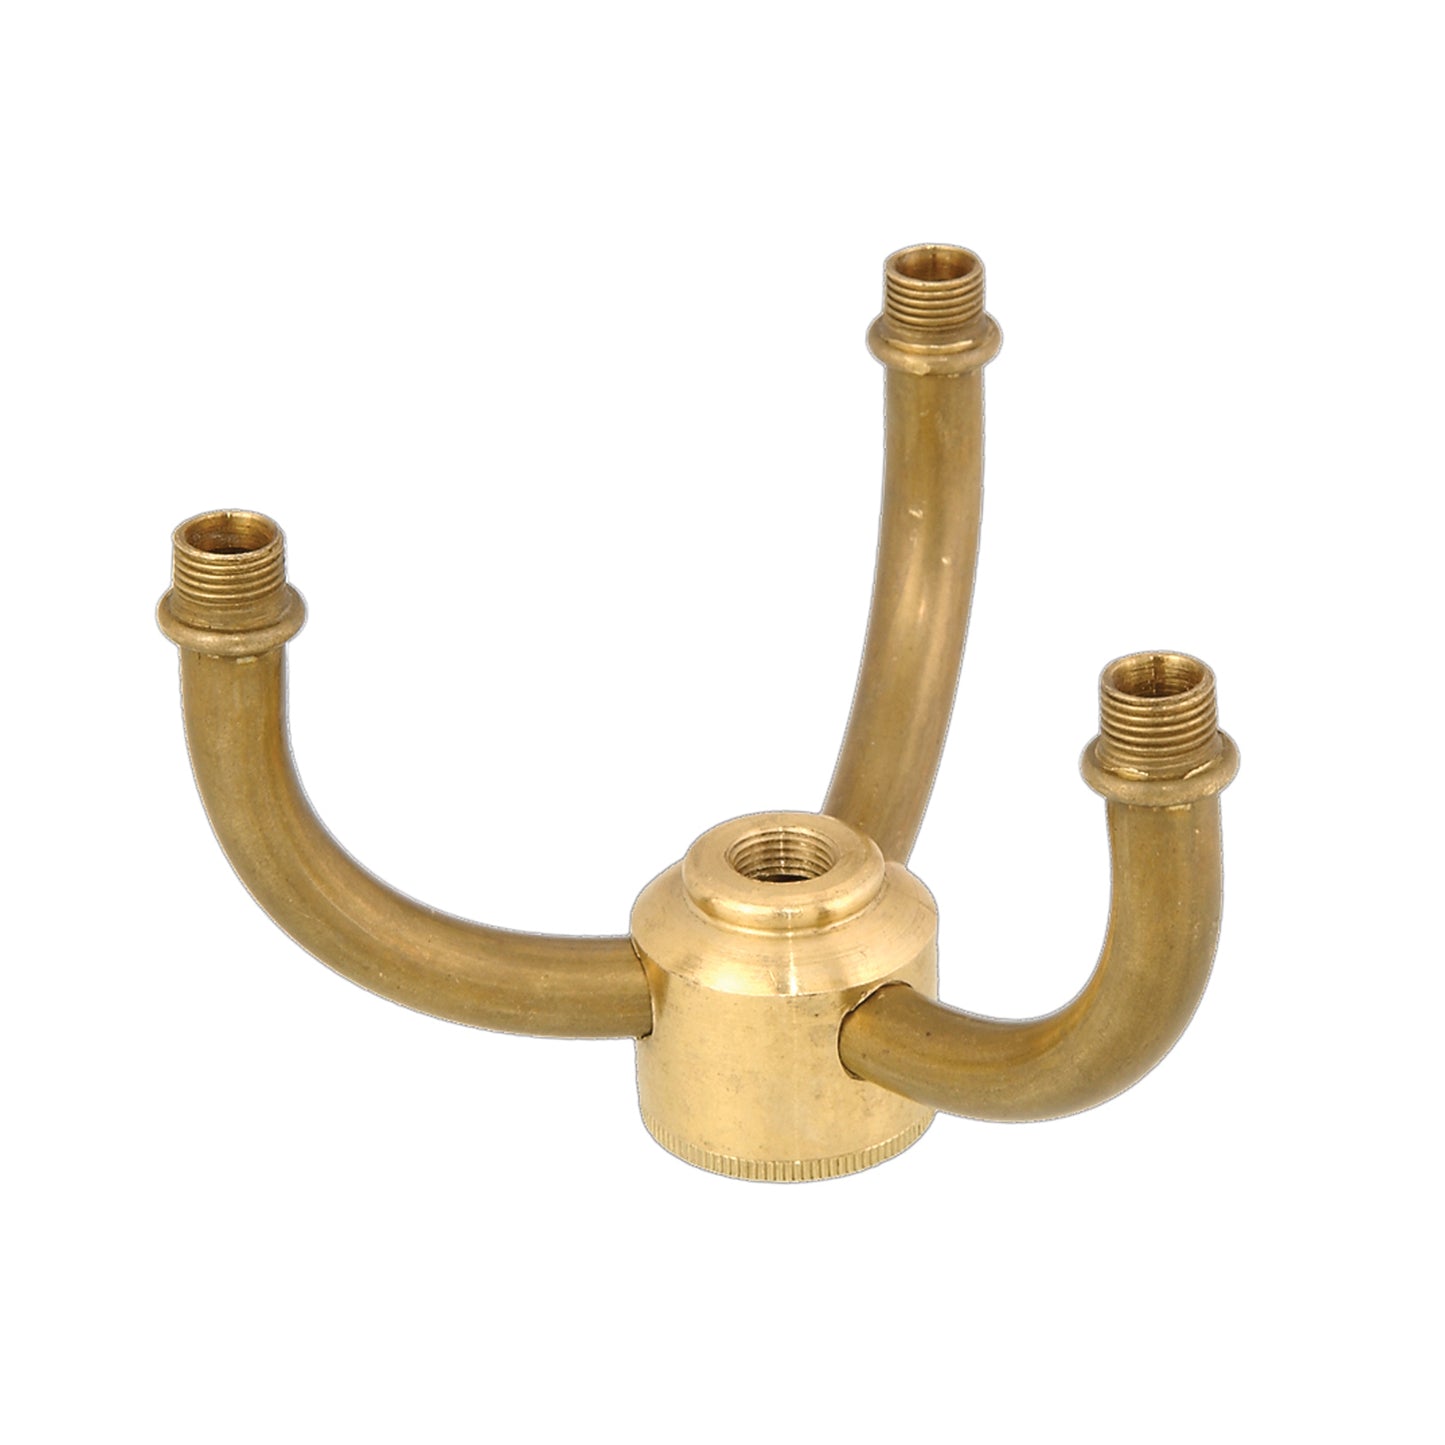 Unwired Solid Brass 3-Arm Lamp Cluster Body - Choice of Finish (10404)